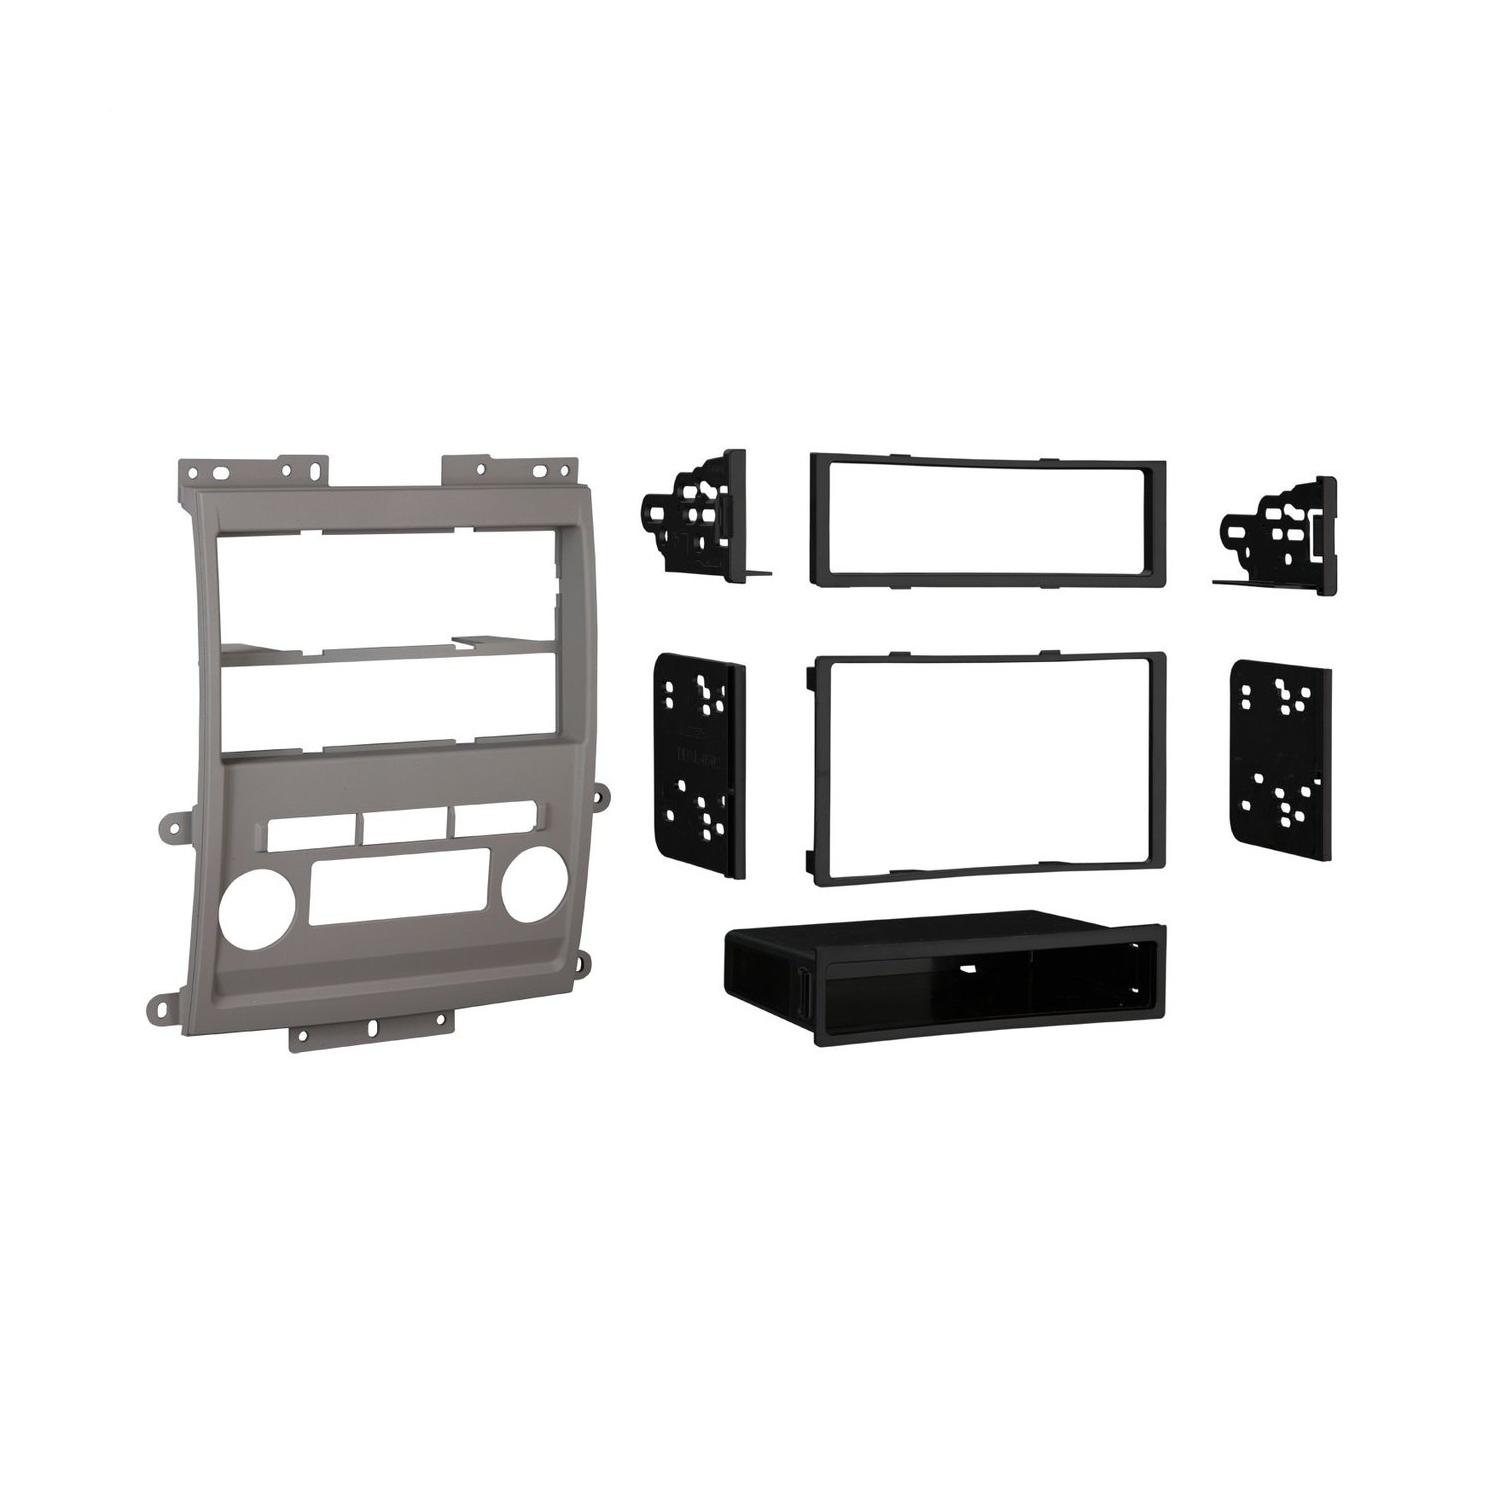 Metra 99-7428G Double DIN/ISO DIN Installation Dash Kit for Select 2009-12 Nissan/Suzuki Vehicles - Gray